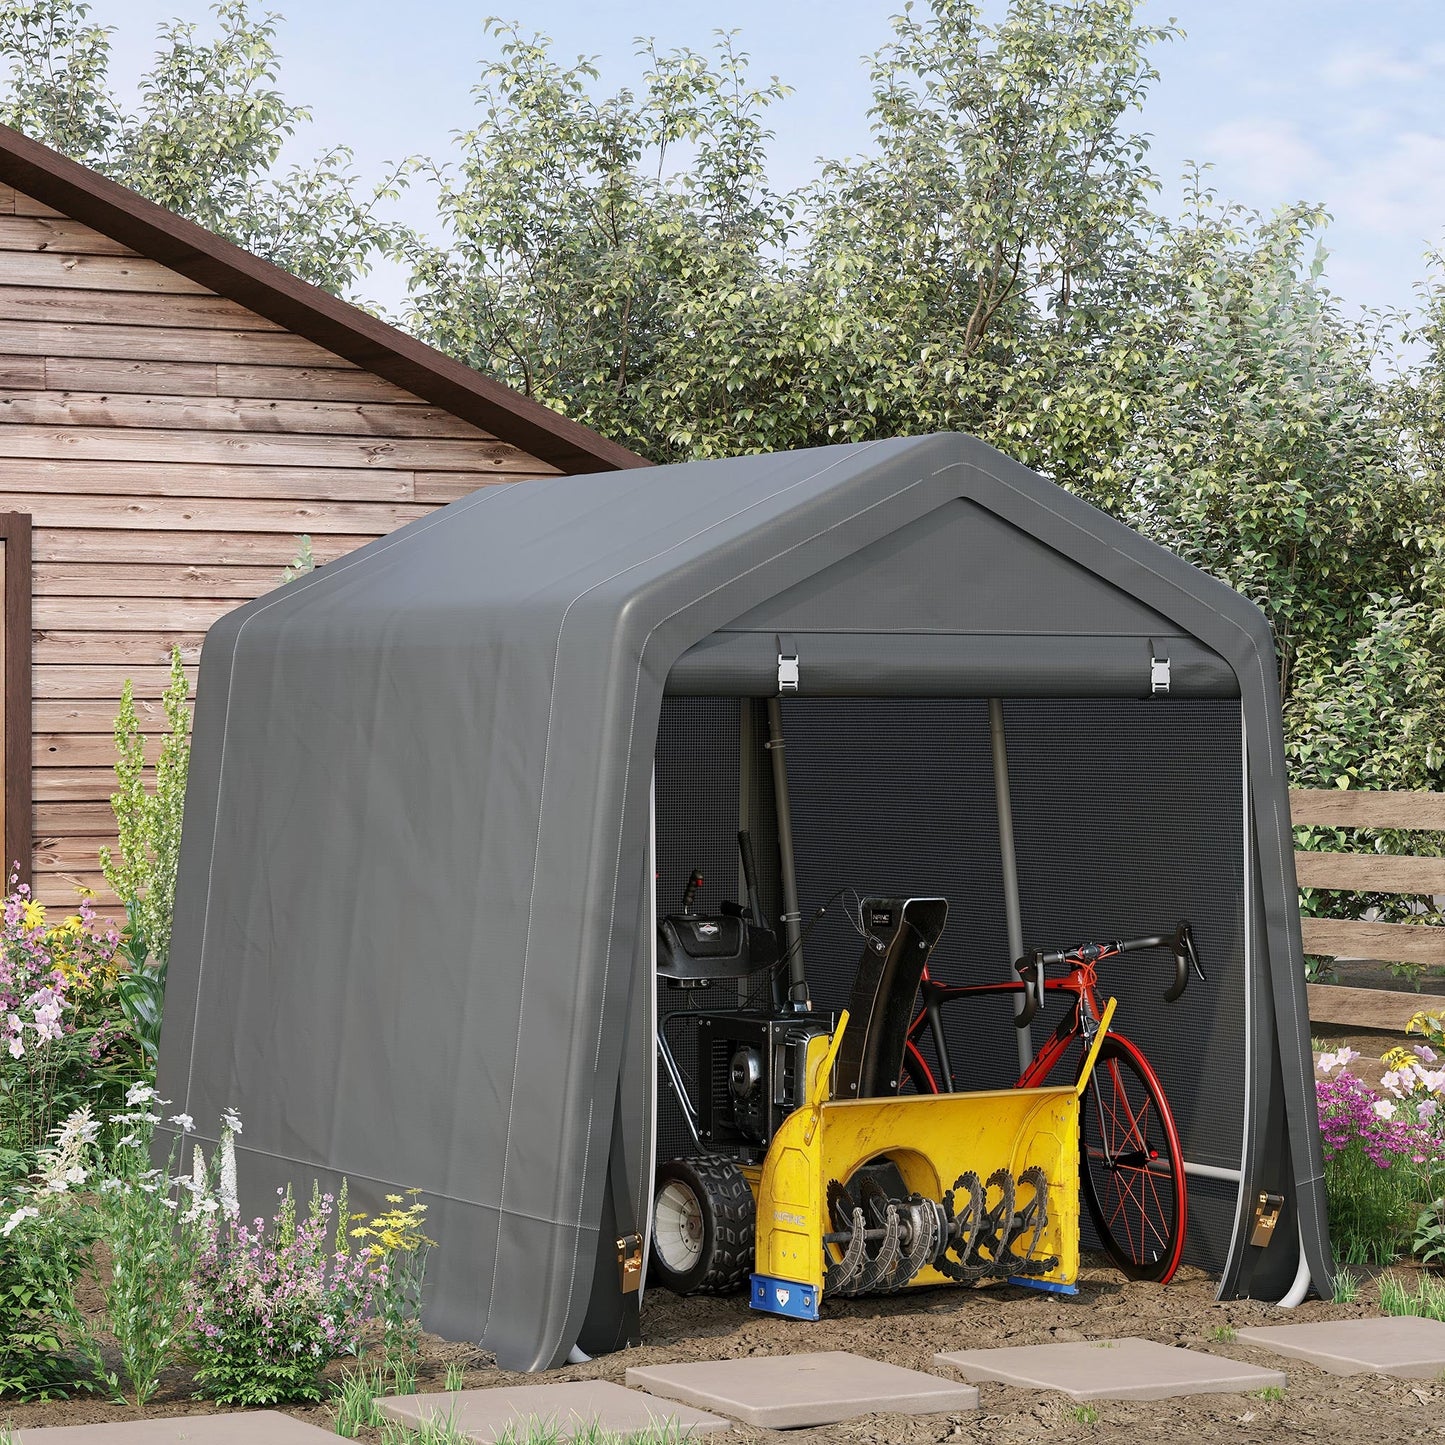 Outdoor and Garden-7.9' x 6.6' Garden Storage Tent, Heavy Duty Bike Shed, Patio Storage Shelter w/ Metal Frame and Double Zipper Doors, Dark Grey - Outdoor Style Company